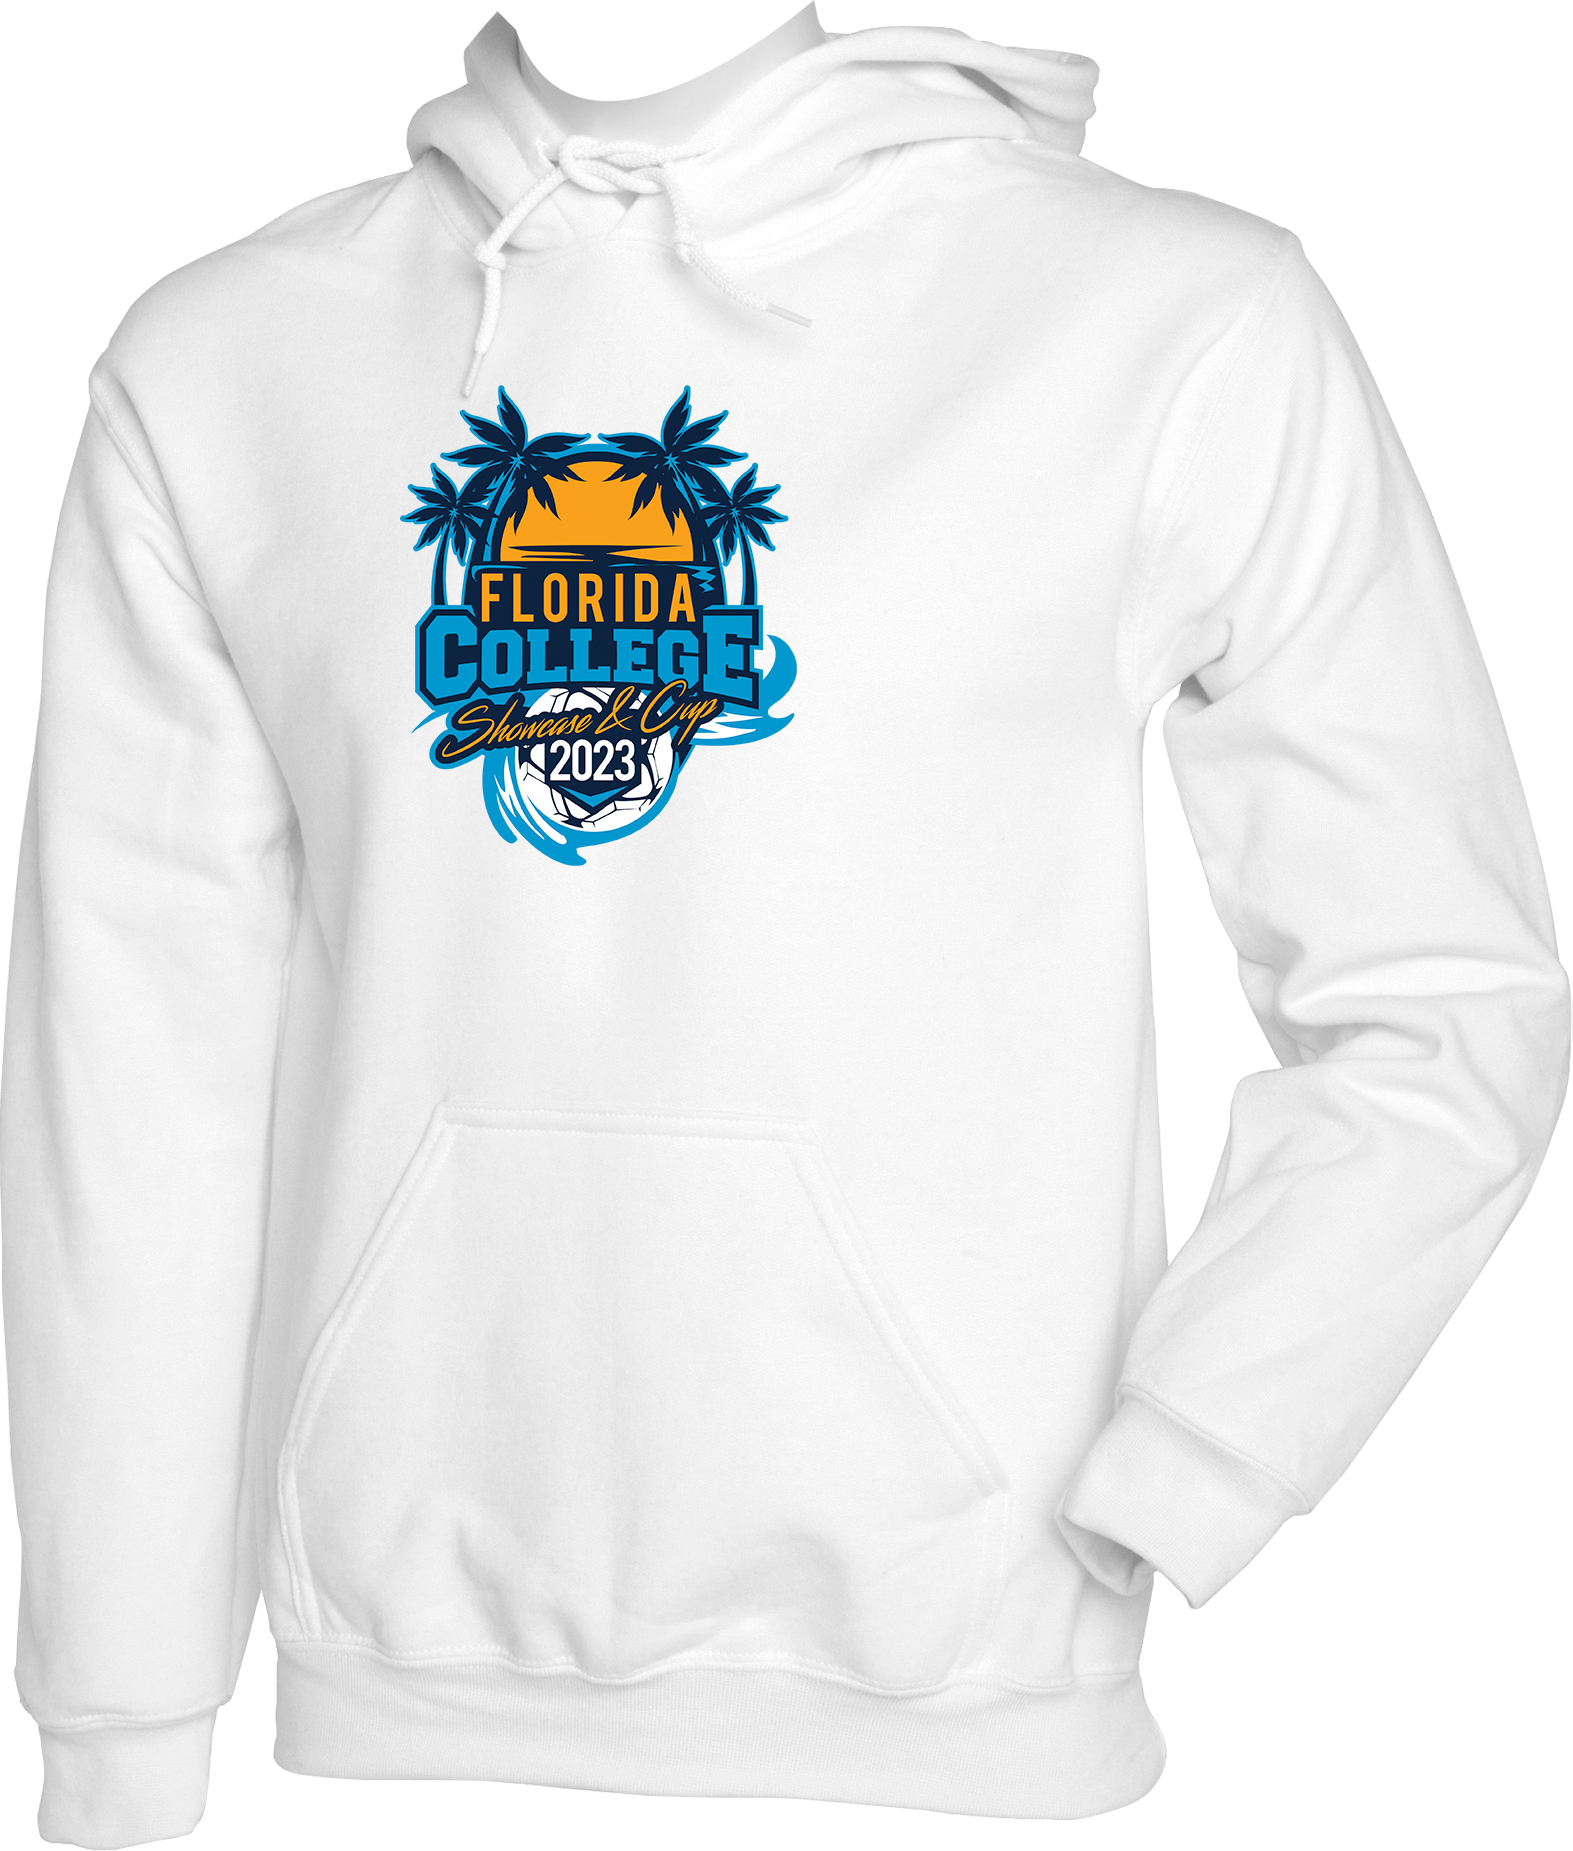 HOODIES - 2023 Florida College Showcase and Cup